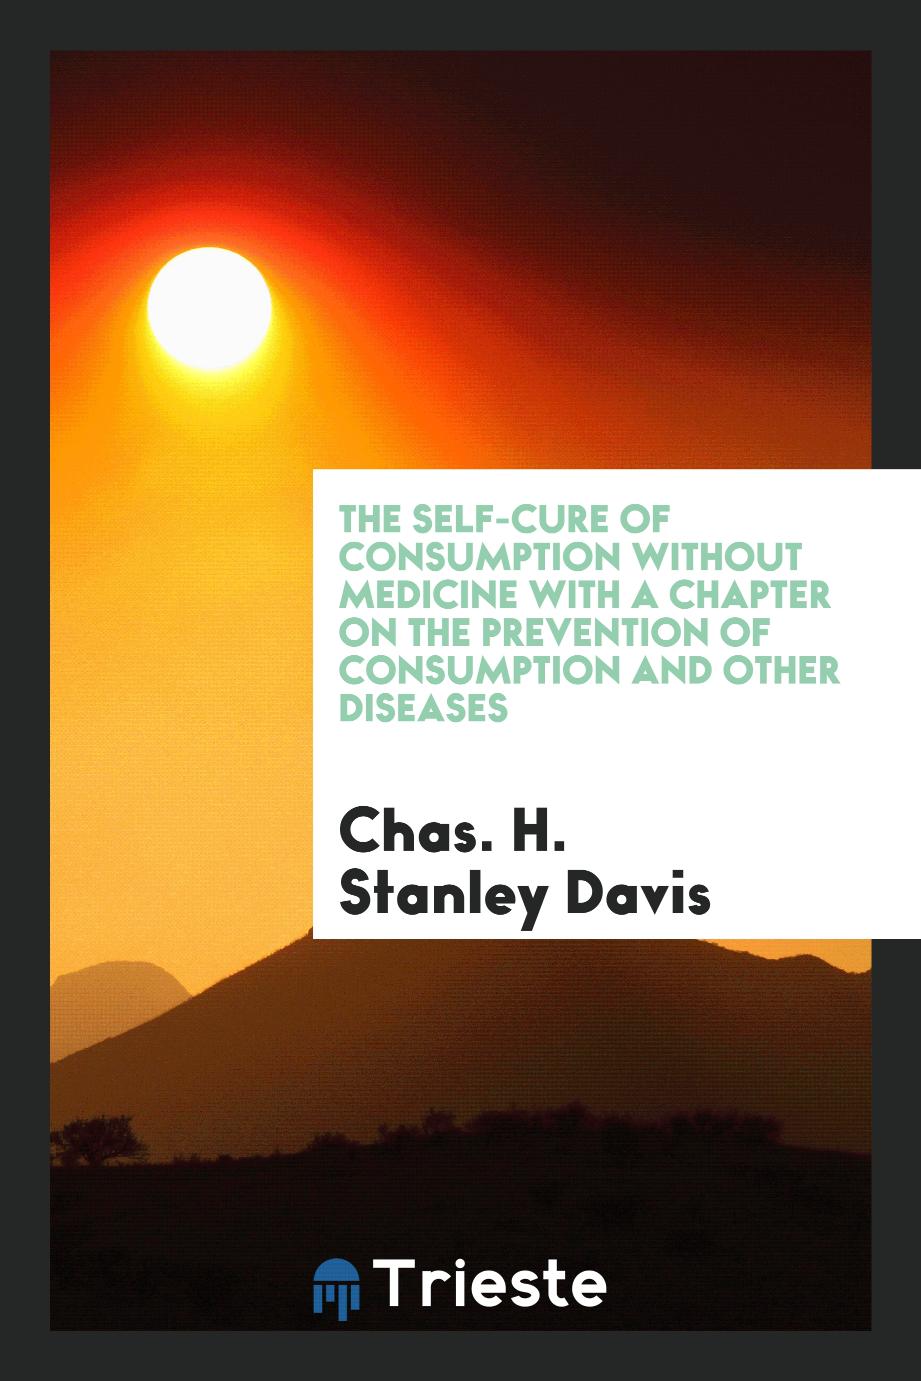 The Self-Cure of Consumption Without Medicine with a Chapter on the Prevention of Consumption and Other Diseases